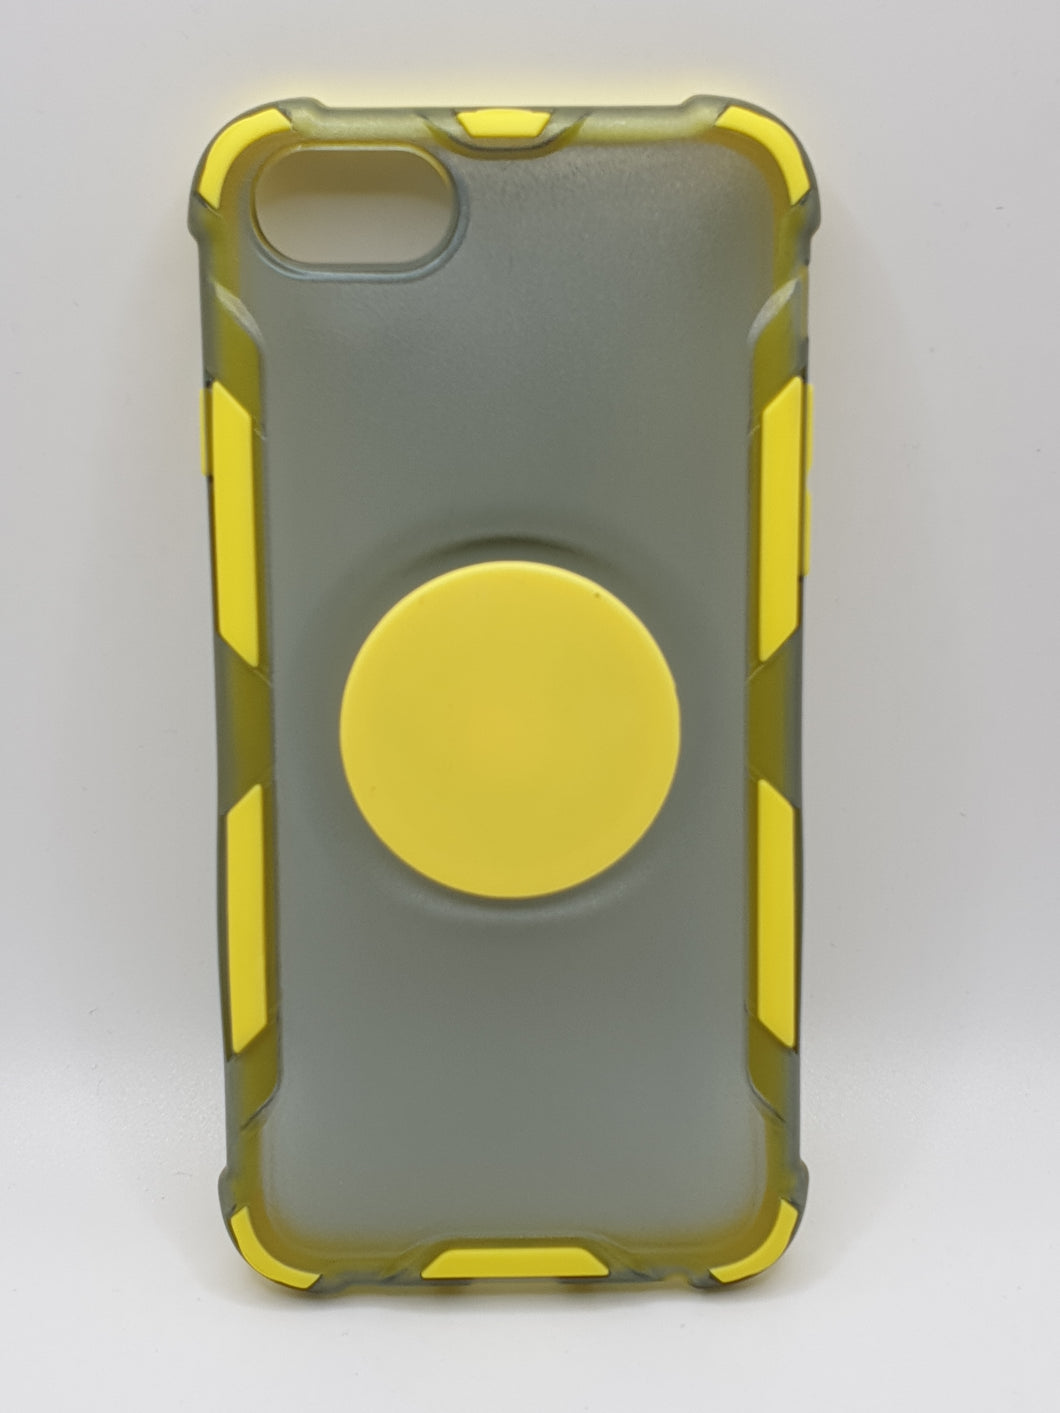 iPhone 6/6S Yellow Transparant Bumper Case Cover With Pop Out Stand Finger Ring Stand